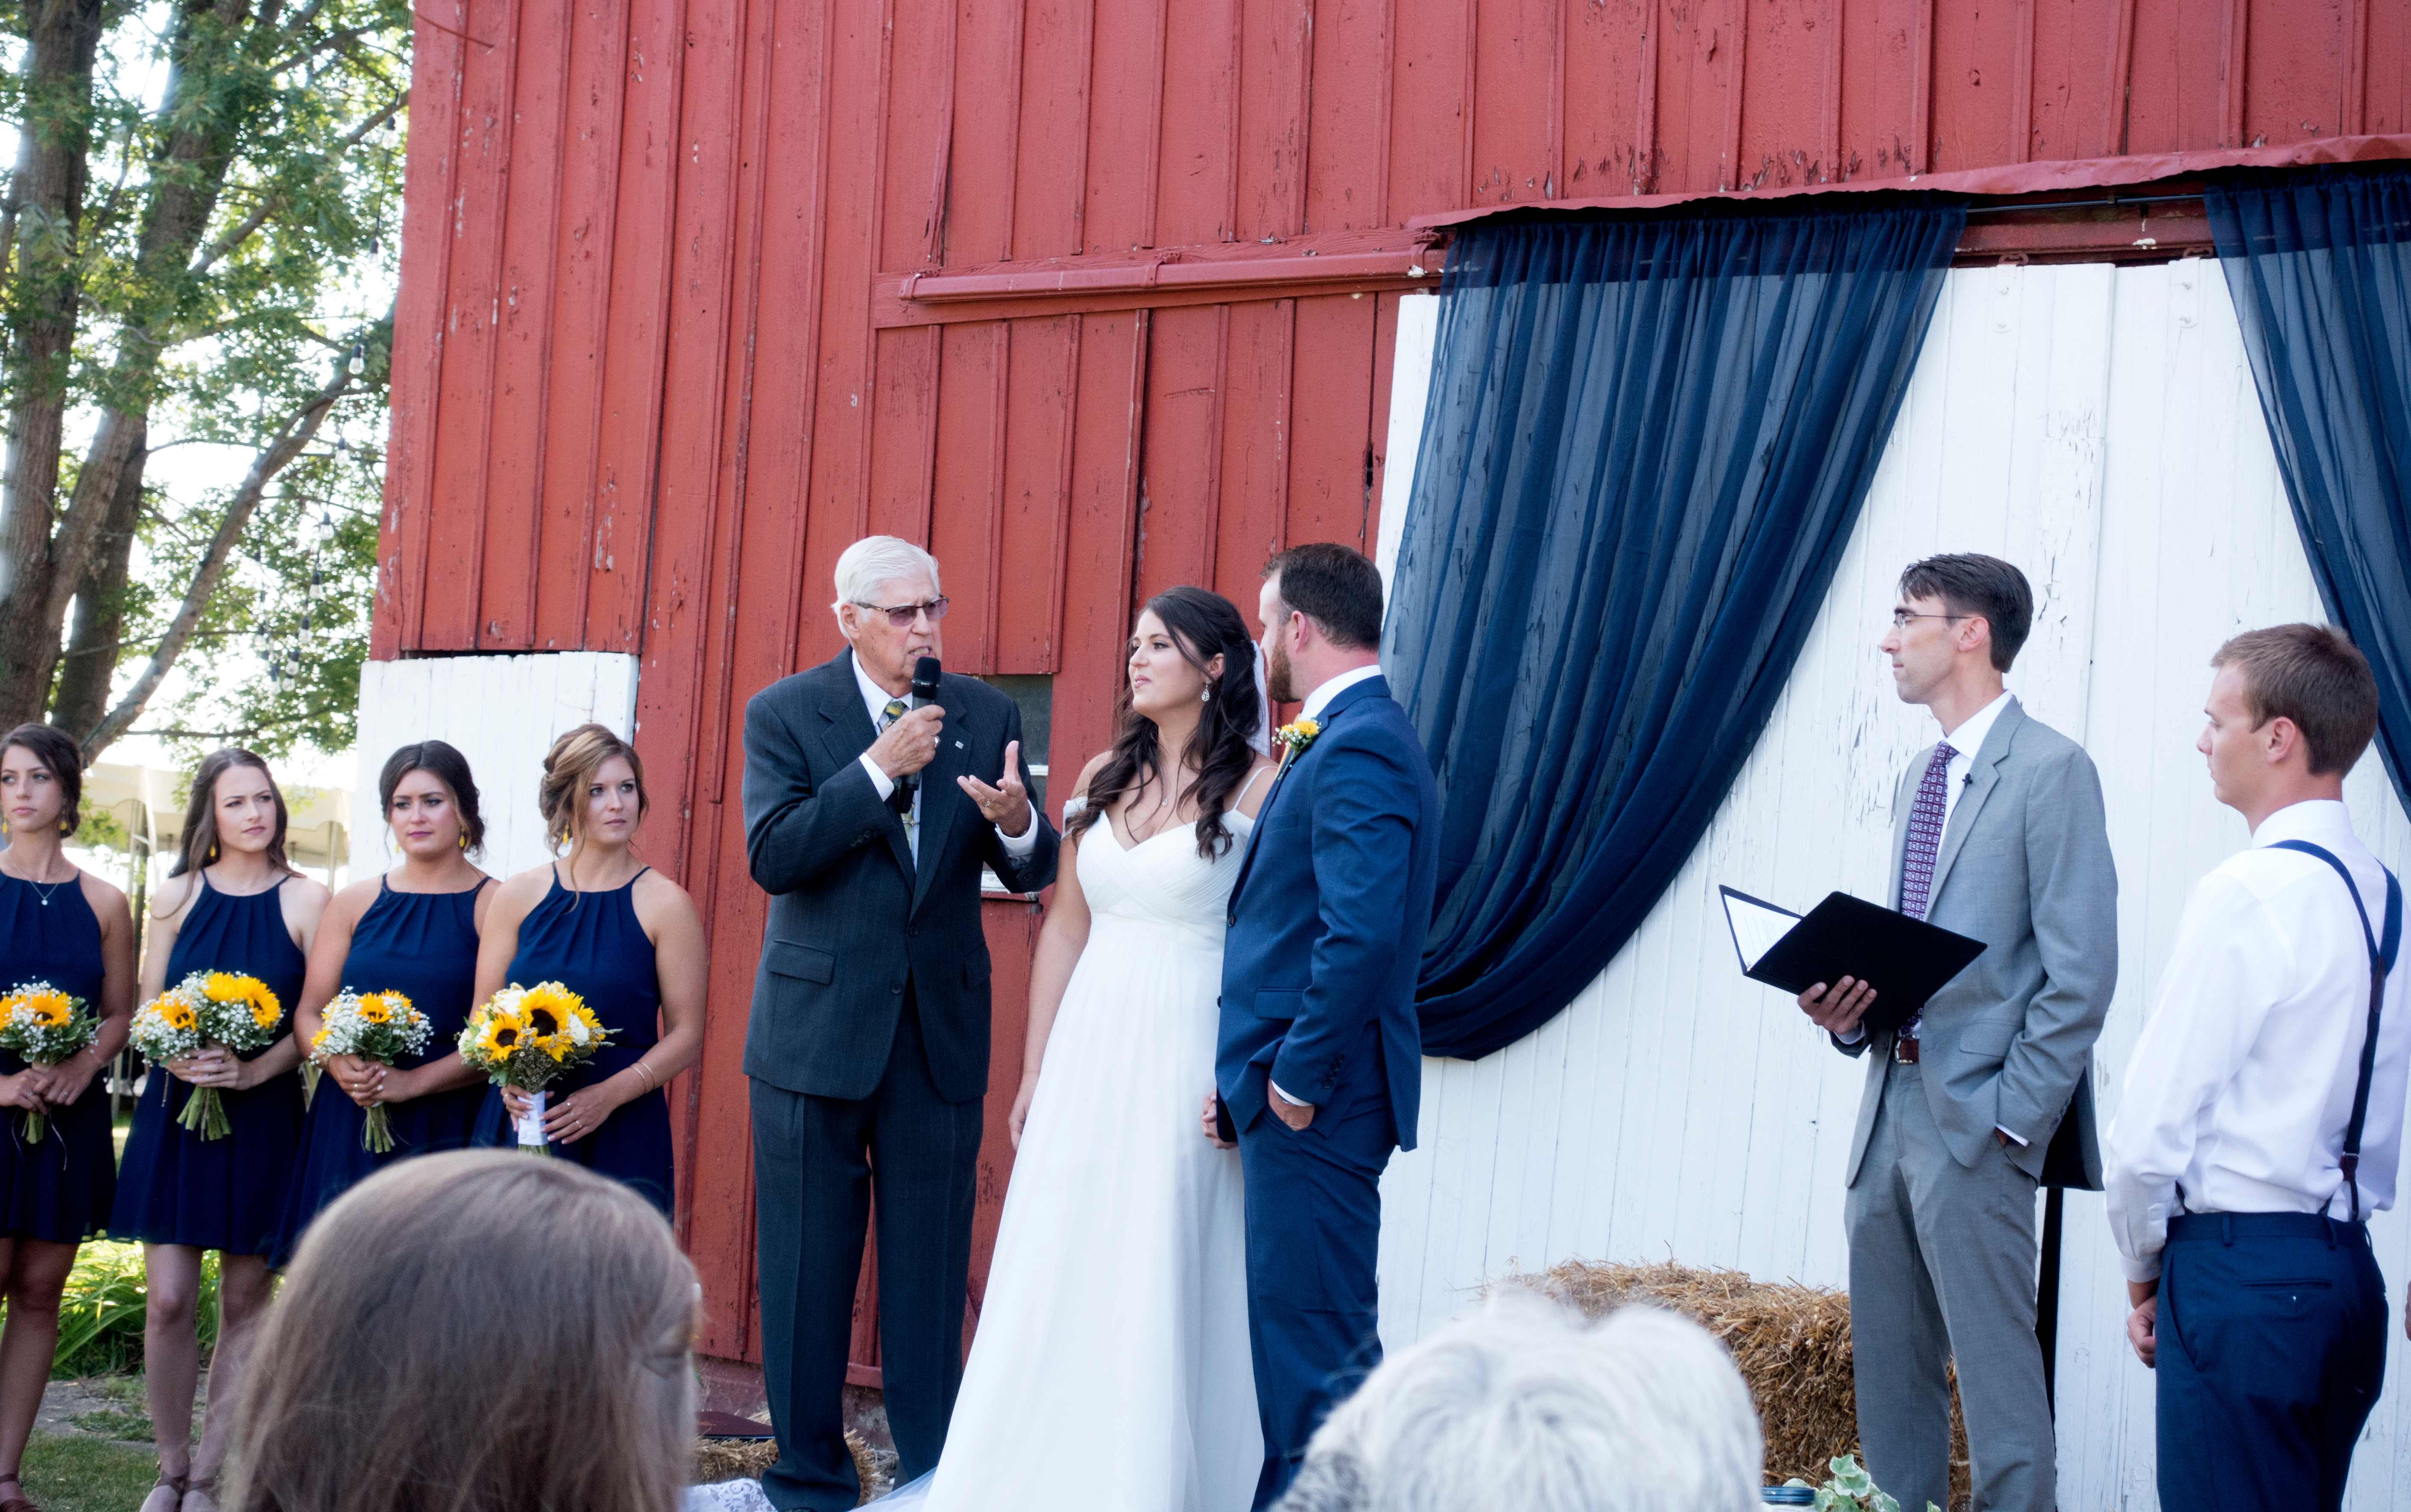 Bride and groom exchanging their wedding vows | Source: Shutterstock